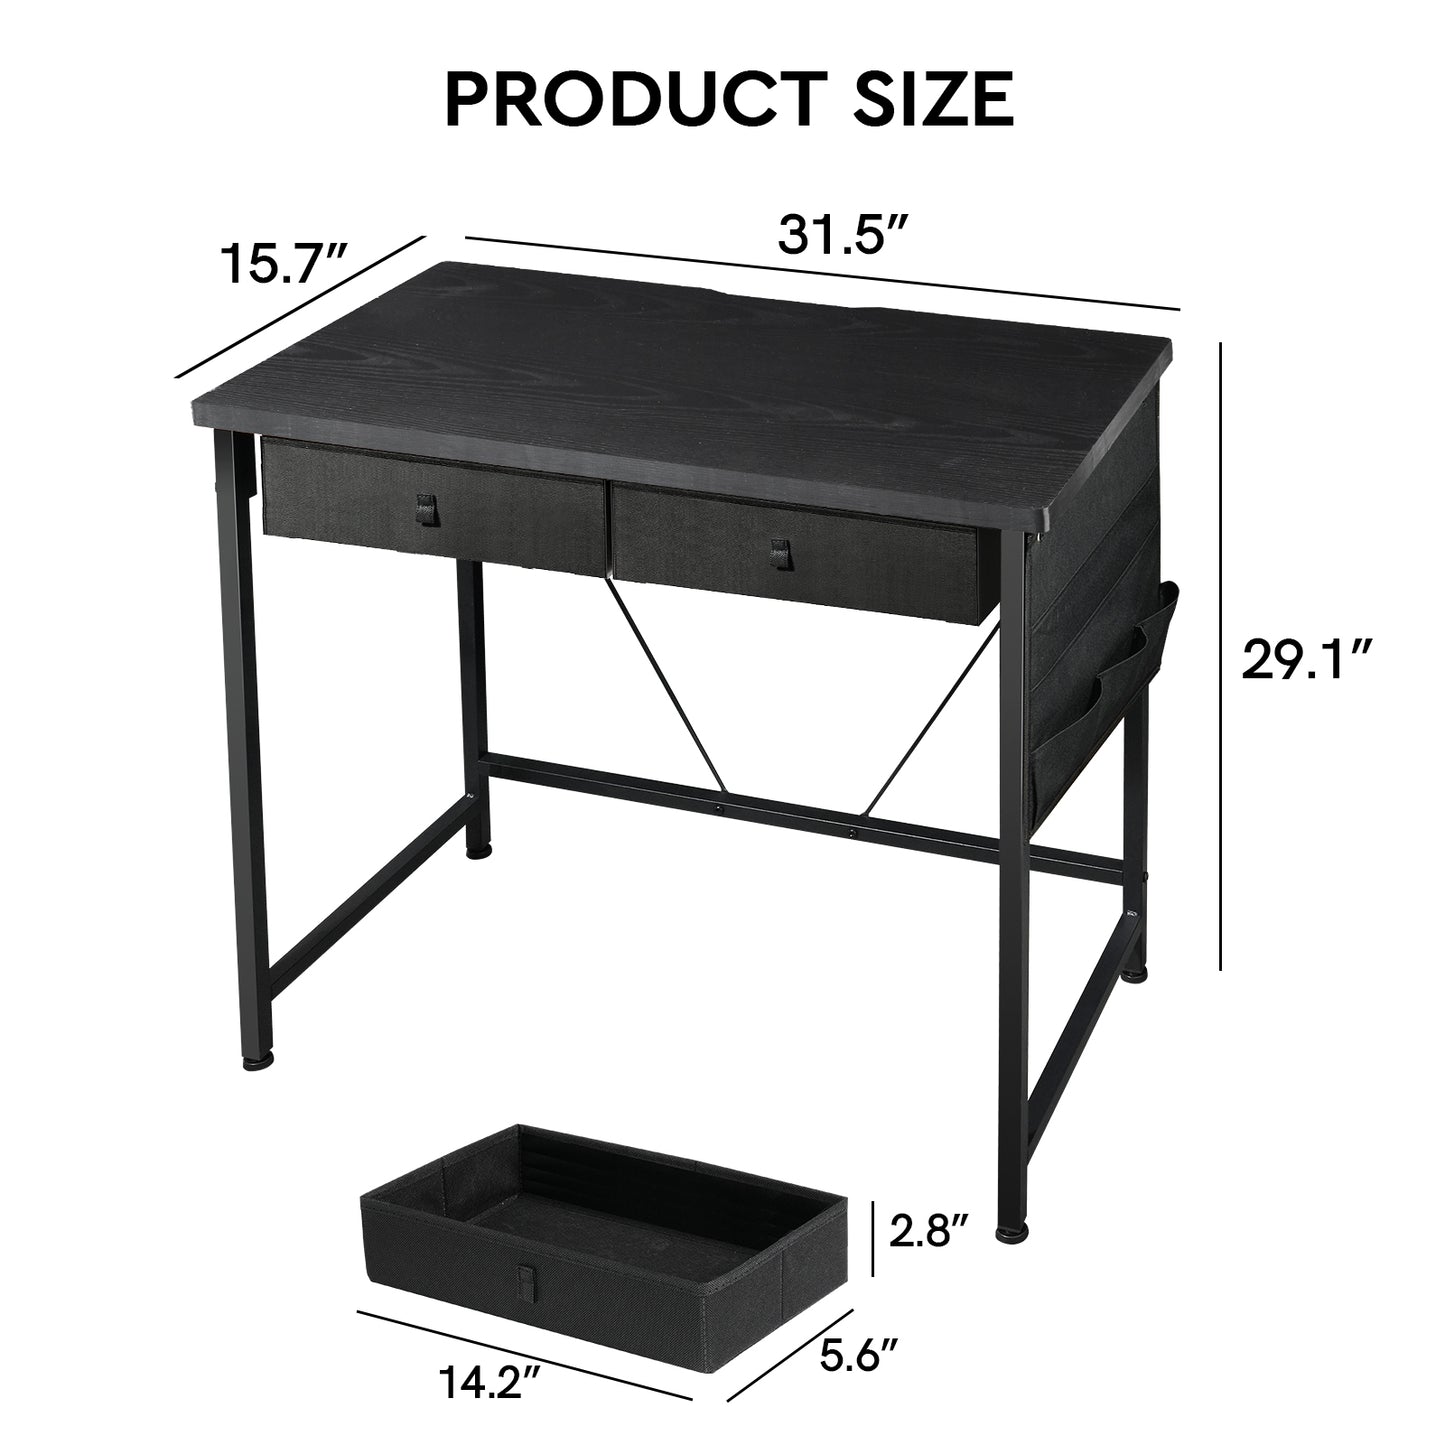 MAIHAIL 31.5 inch Desk with Drawers, Black